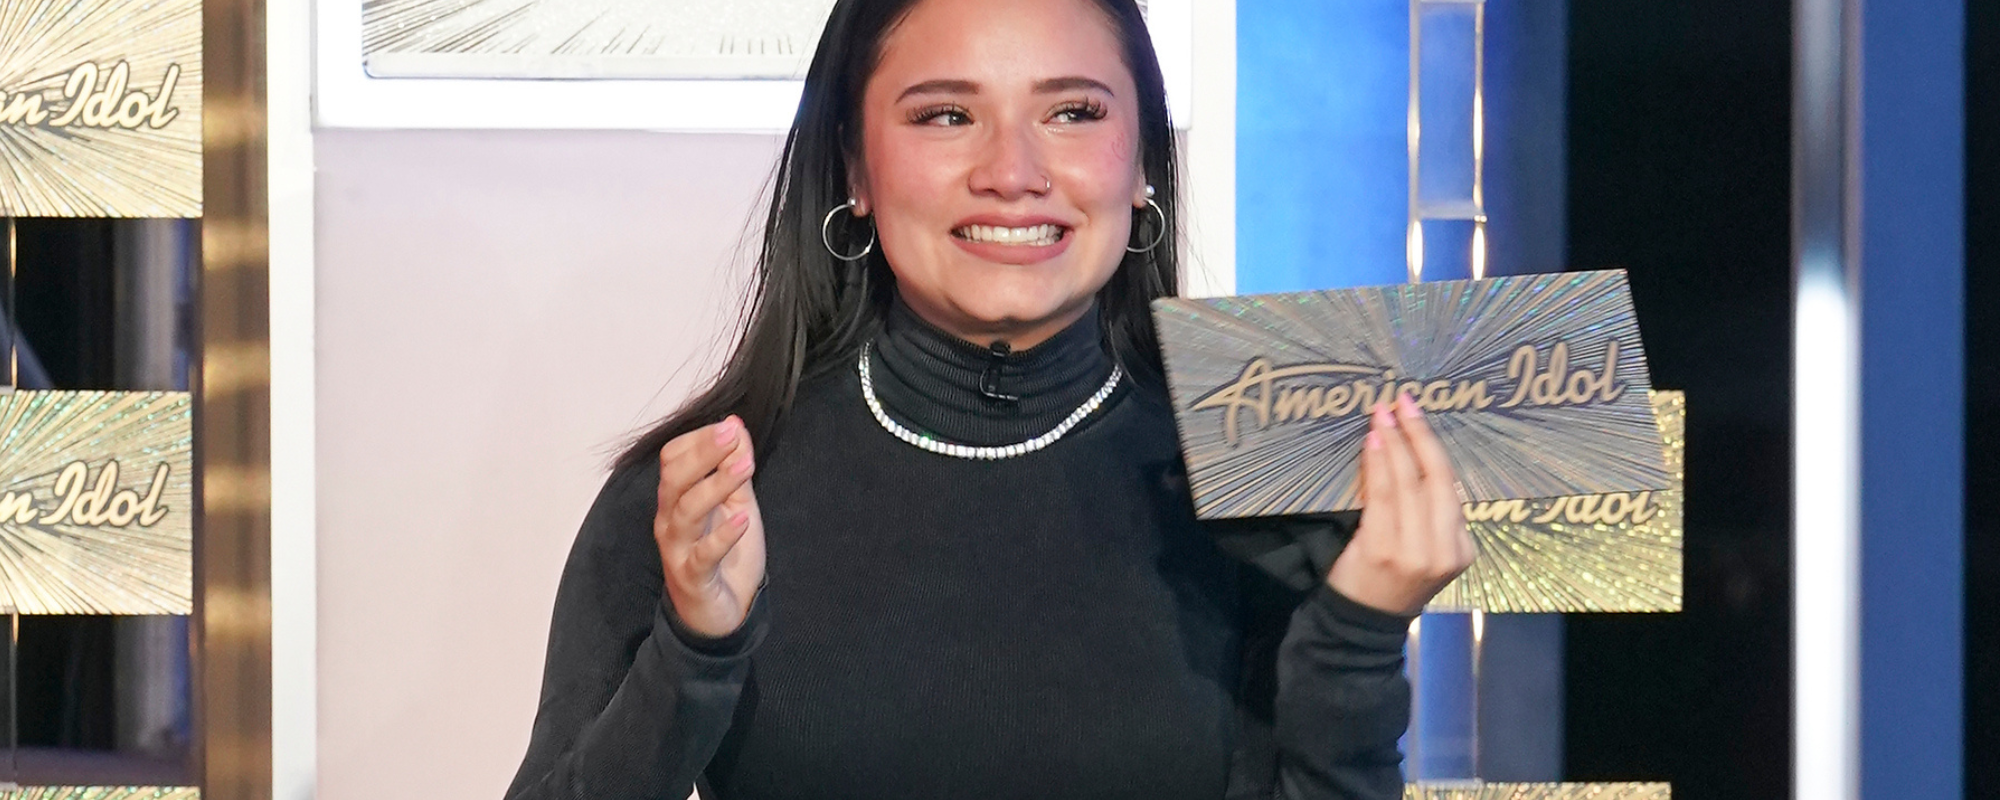 Fire Wilmore Earns a Golden Ticket During ‘American Idol’ Second Chance Audition